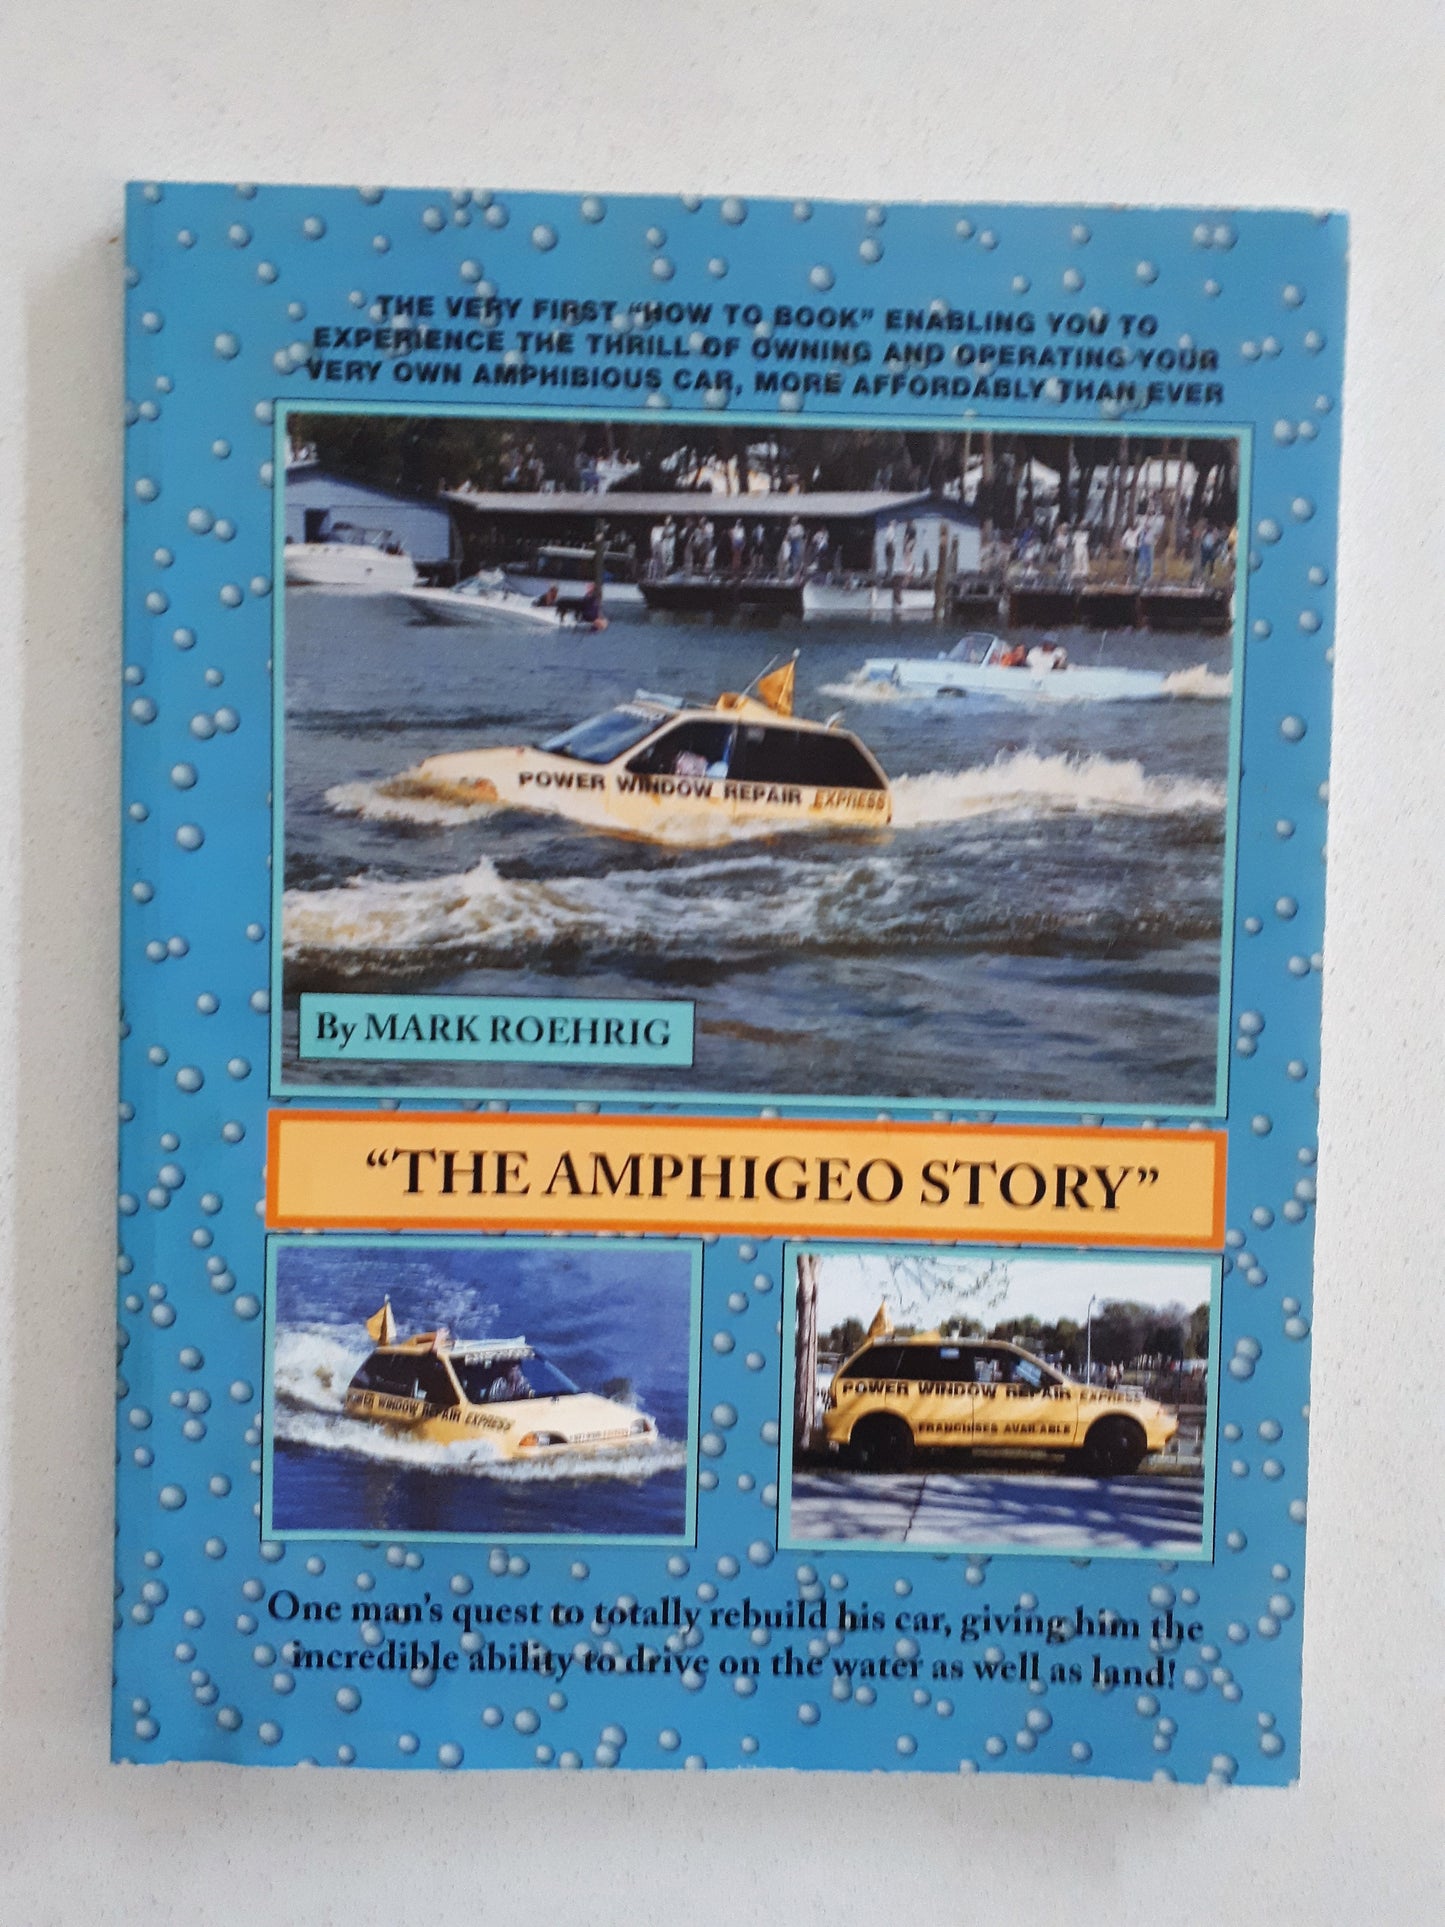 The Amphigeo Story by Mark Roehrig